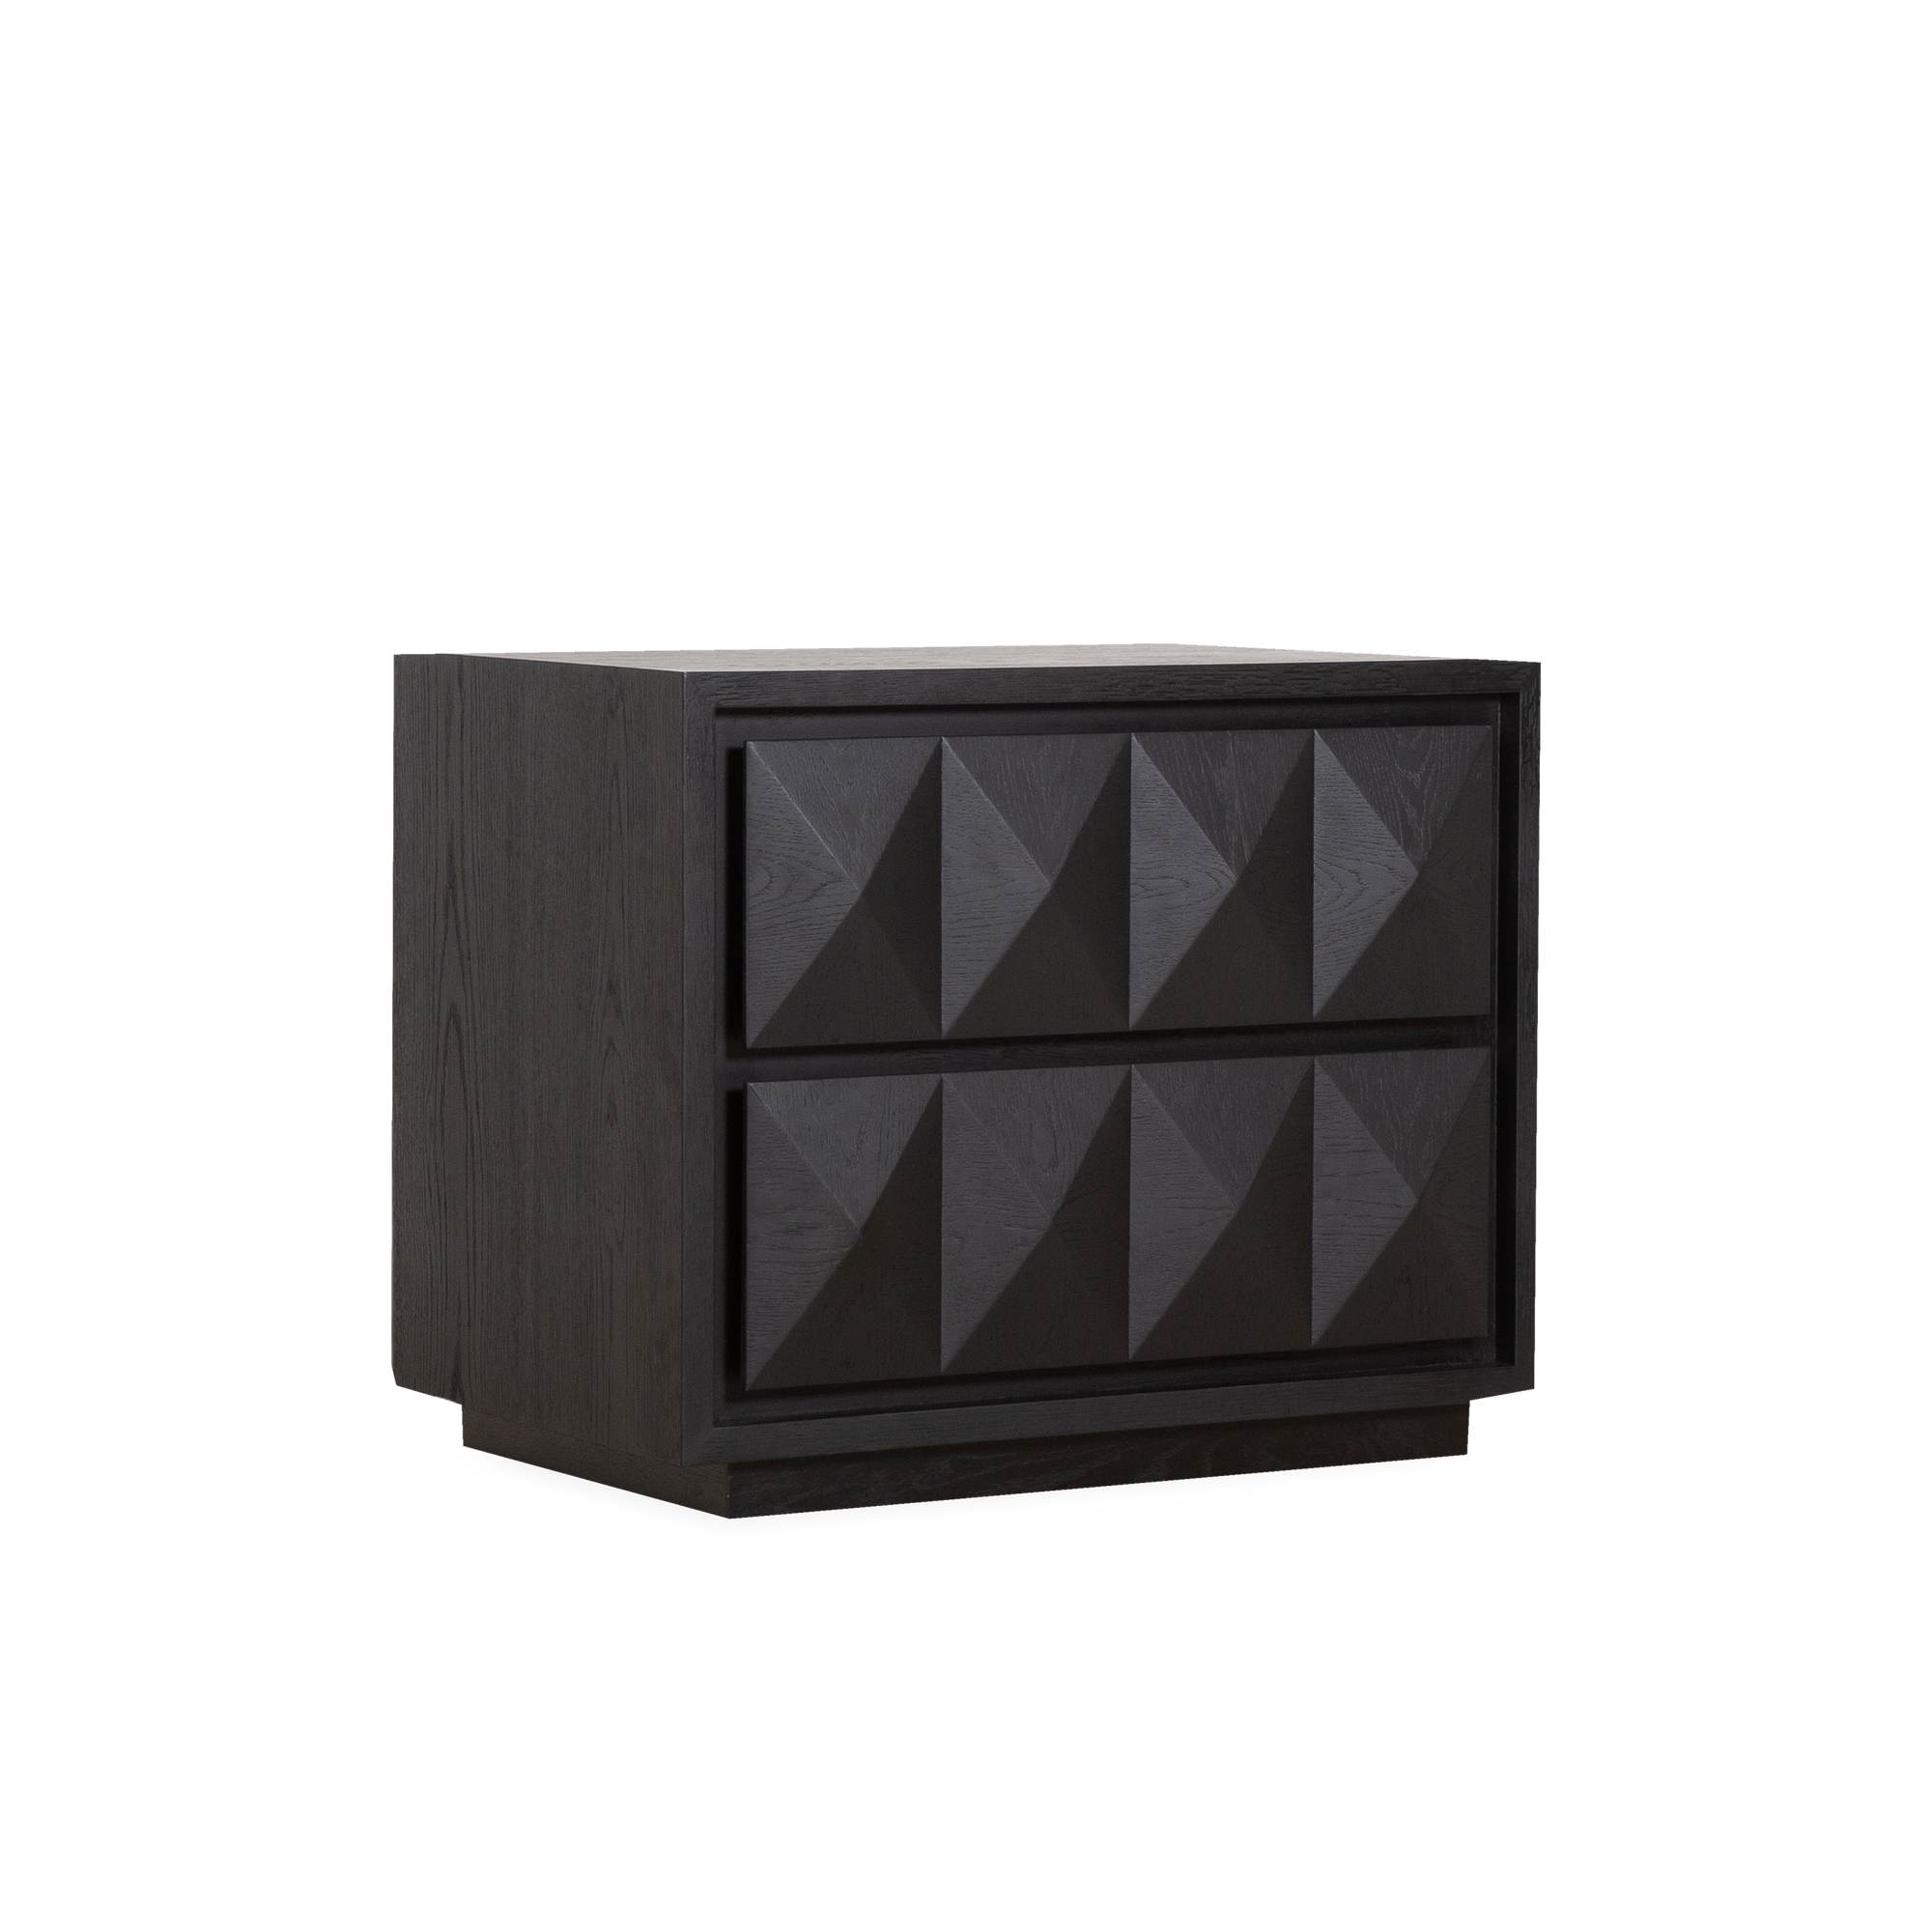 The Bruges Nightstand draws inspiration from the raw power and geometric precision of 1960s Brutalist architecture.